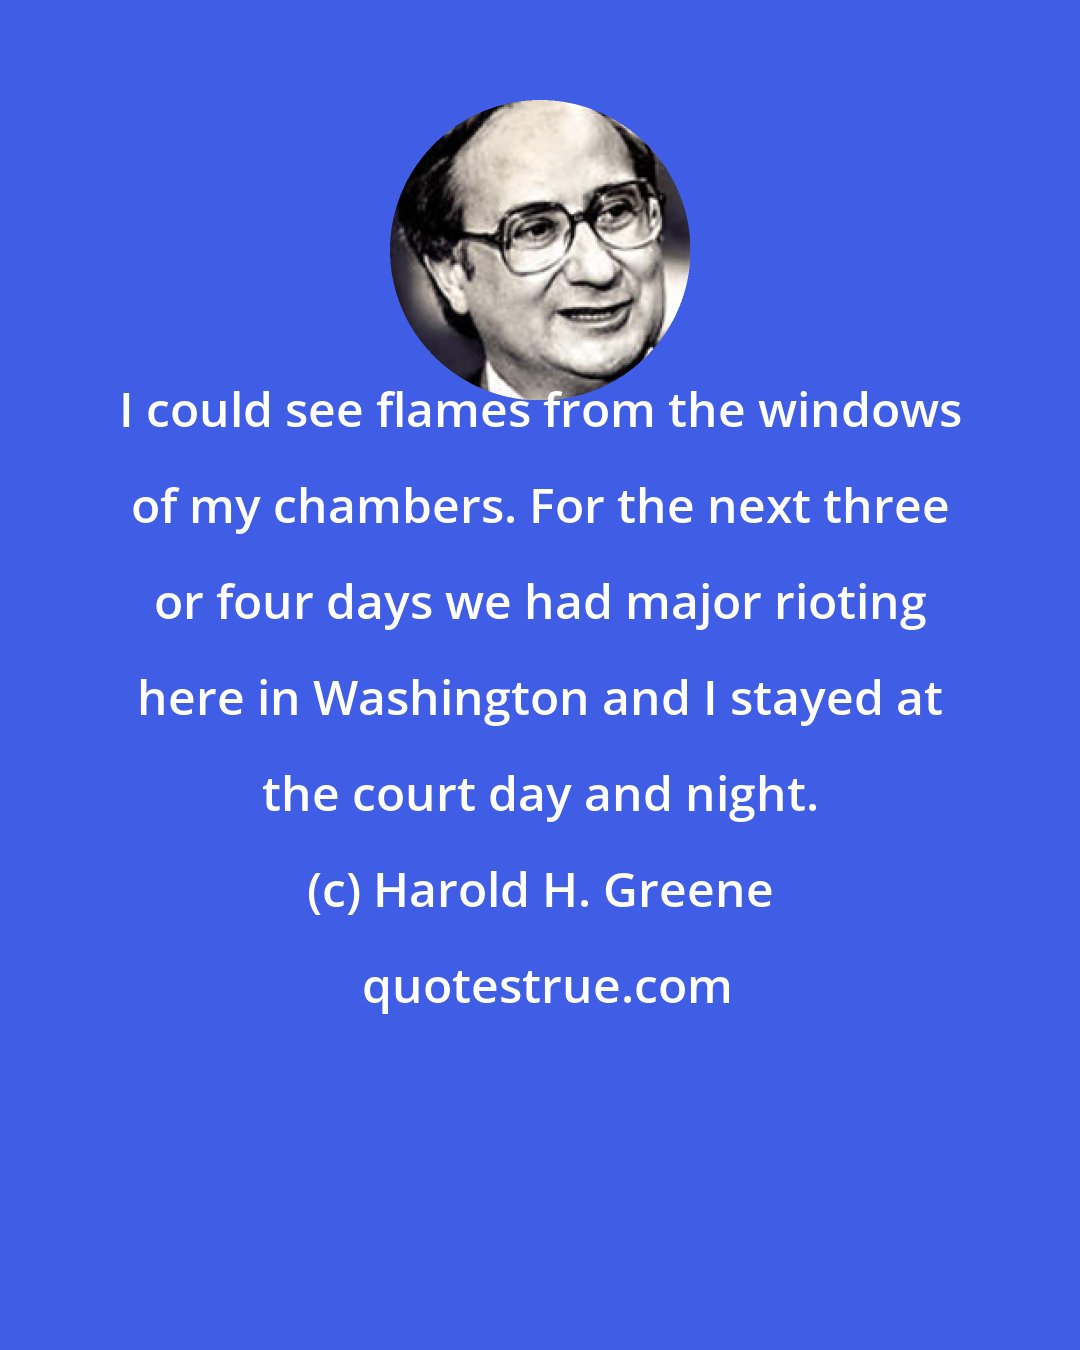 Harold H. Greene: I could see flames from the windows of my chambers. For the next three or four days we had major rioting here in Washington and I stayed at the court day and night.